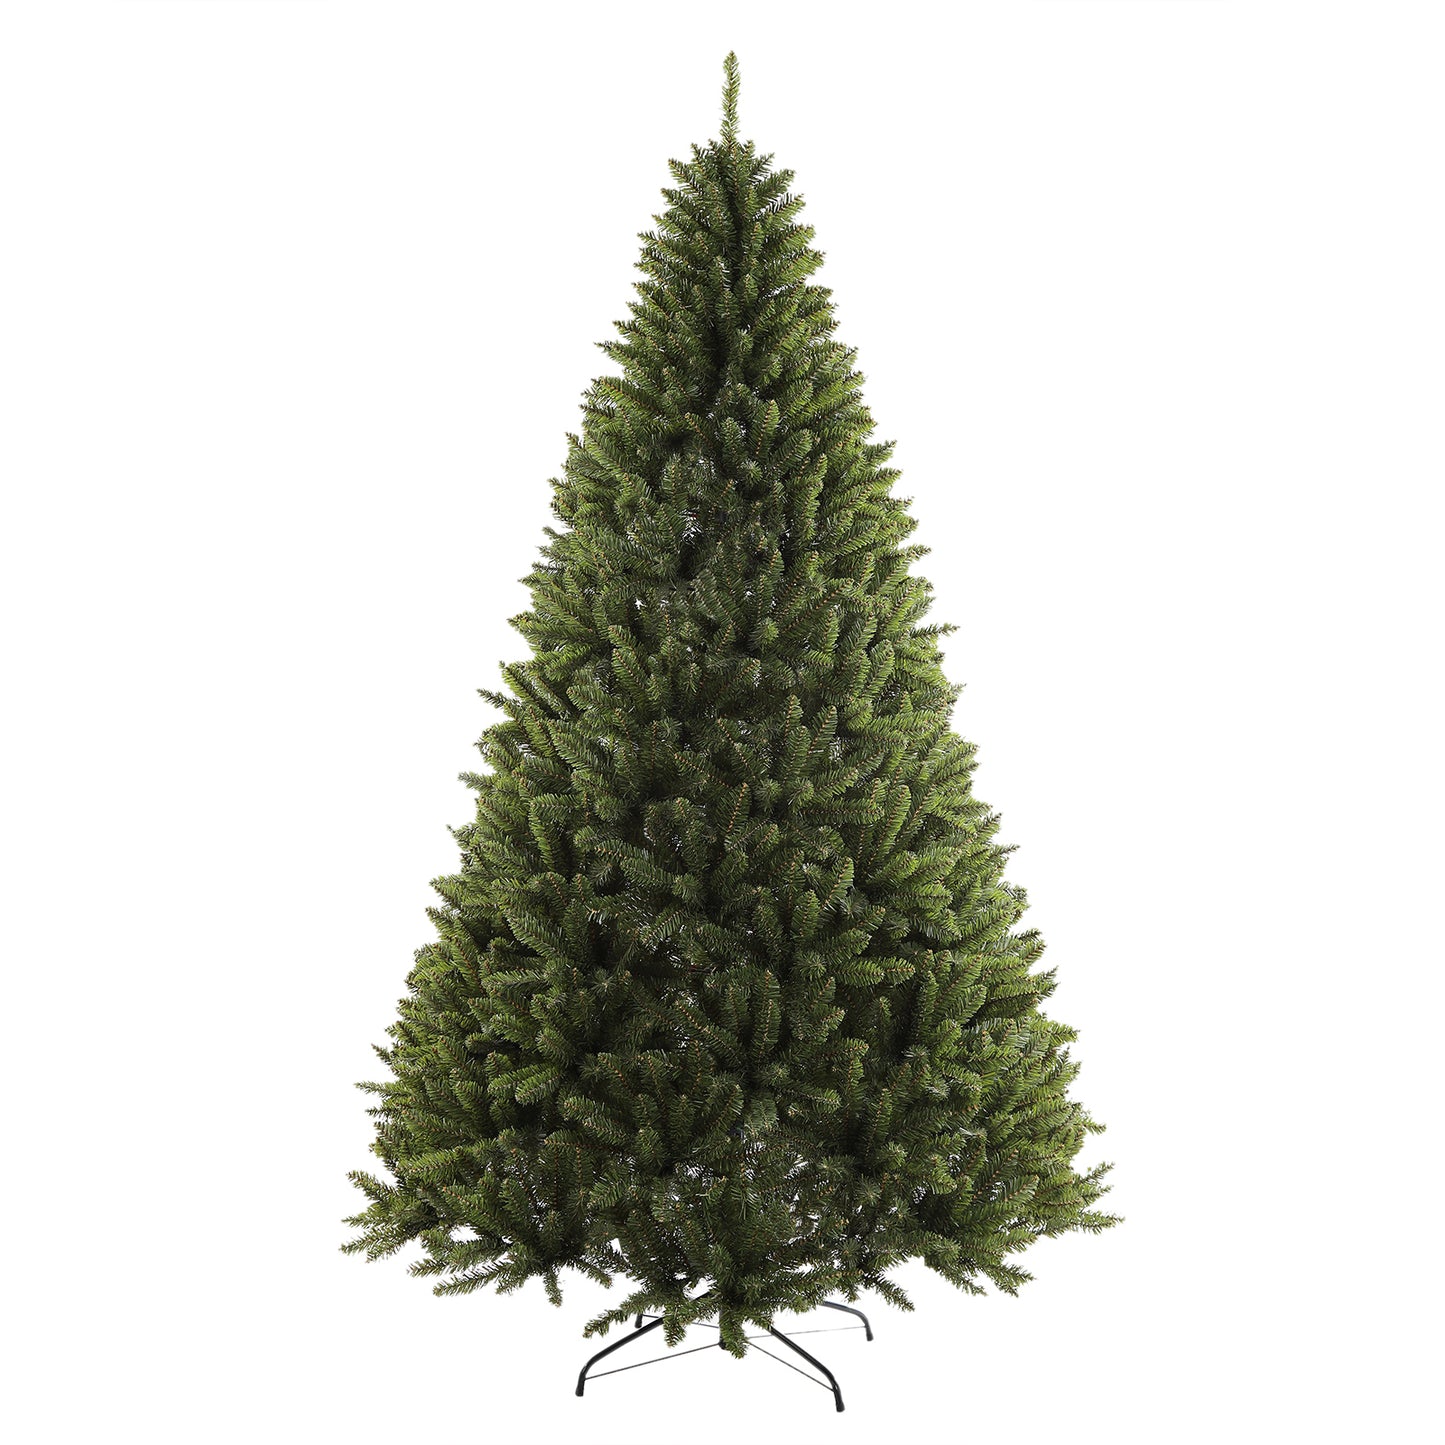 9ft Faux Christmas Tree with Dense PVC Leaves, Green, Holiday Home Office Party Decor, 2830 Branch Tips Metal Hinges & Foldable Base